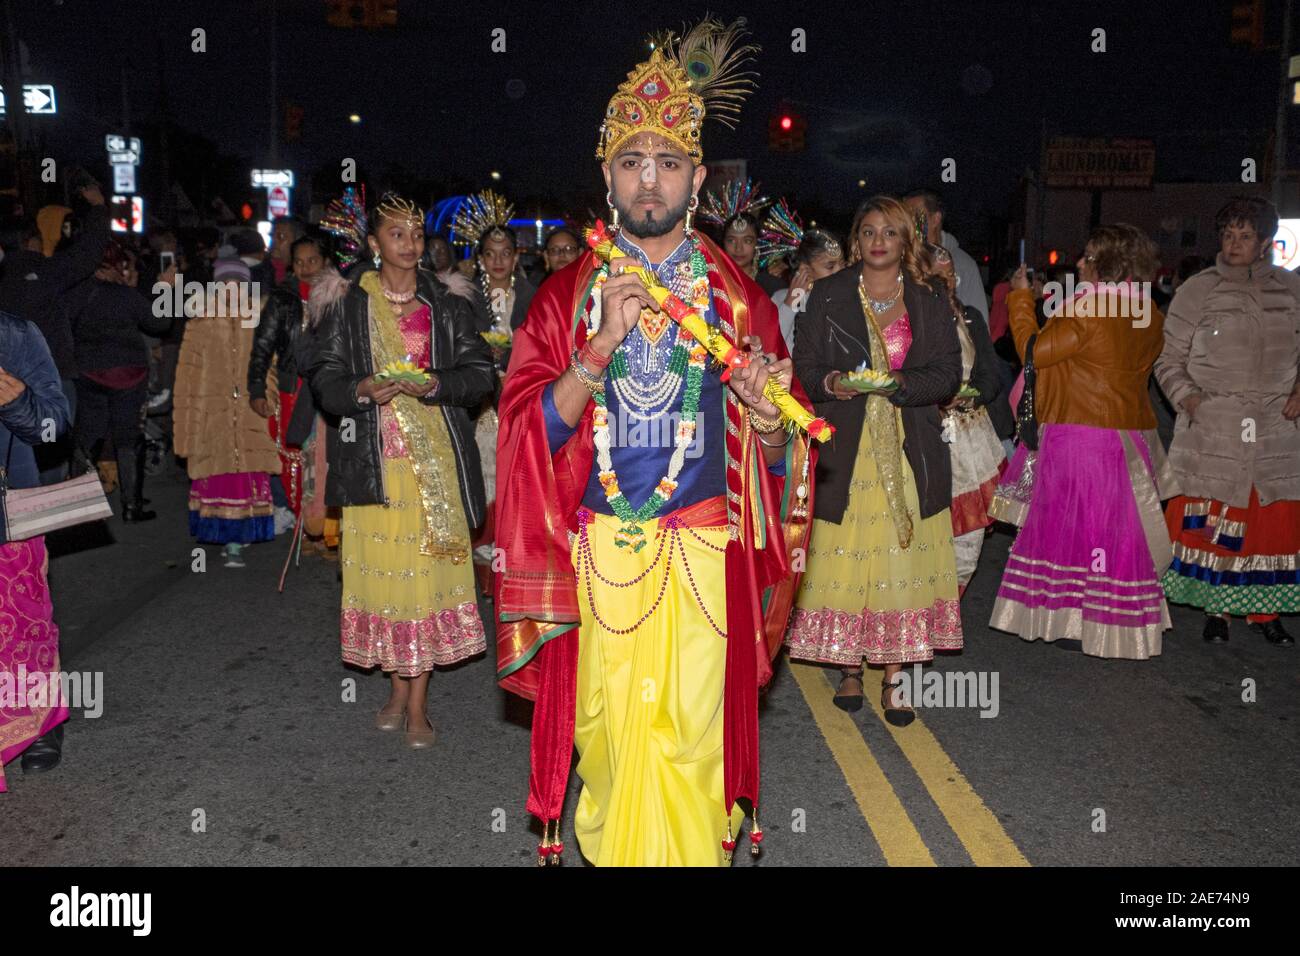 Marchers in colorful costumes in the Diwali Parade on Liberty Avenue in Queens, New York. Stock Photo